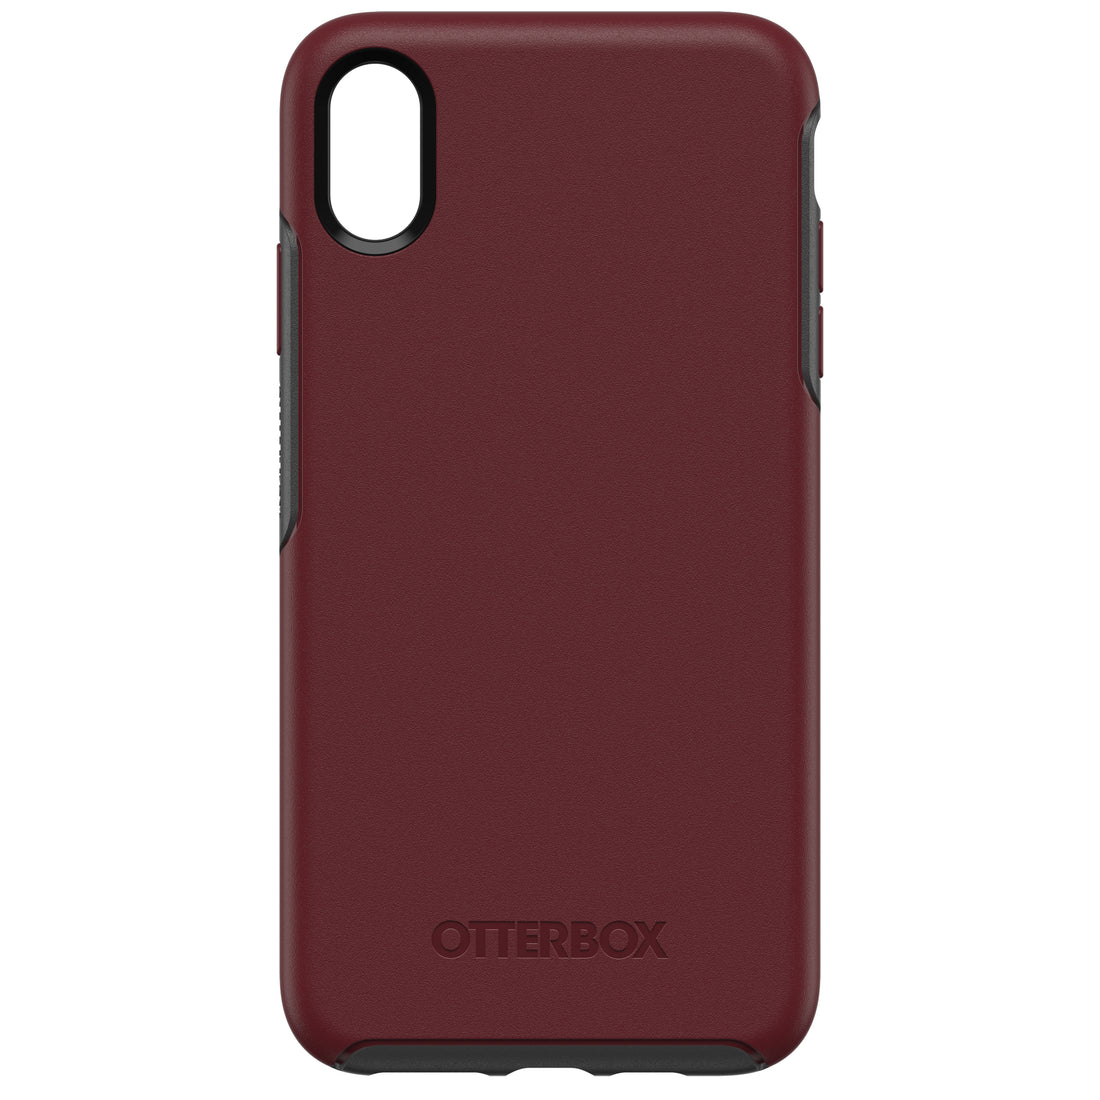 OtterBox SYMMETRY SERIES Case for Apple iPhone XS Max - Fine Port (Certified Refurbished)